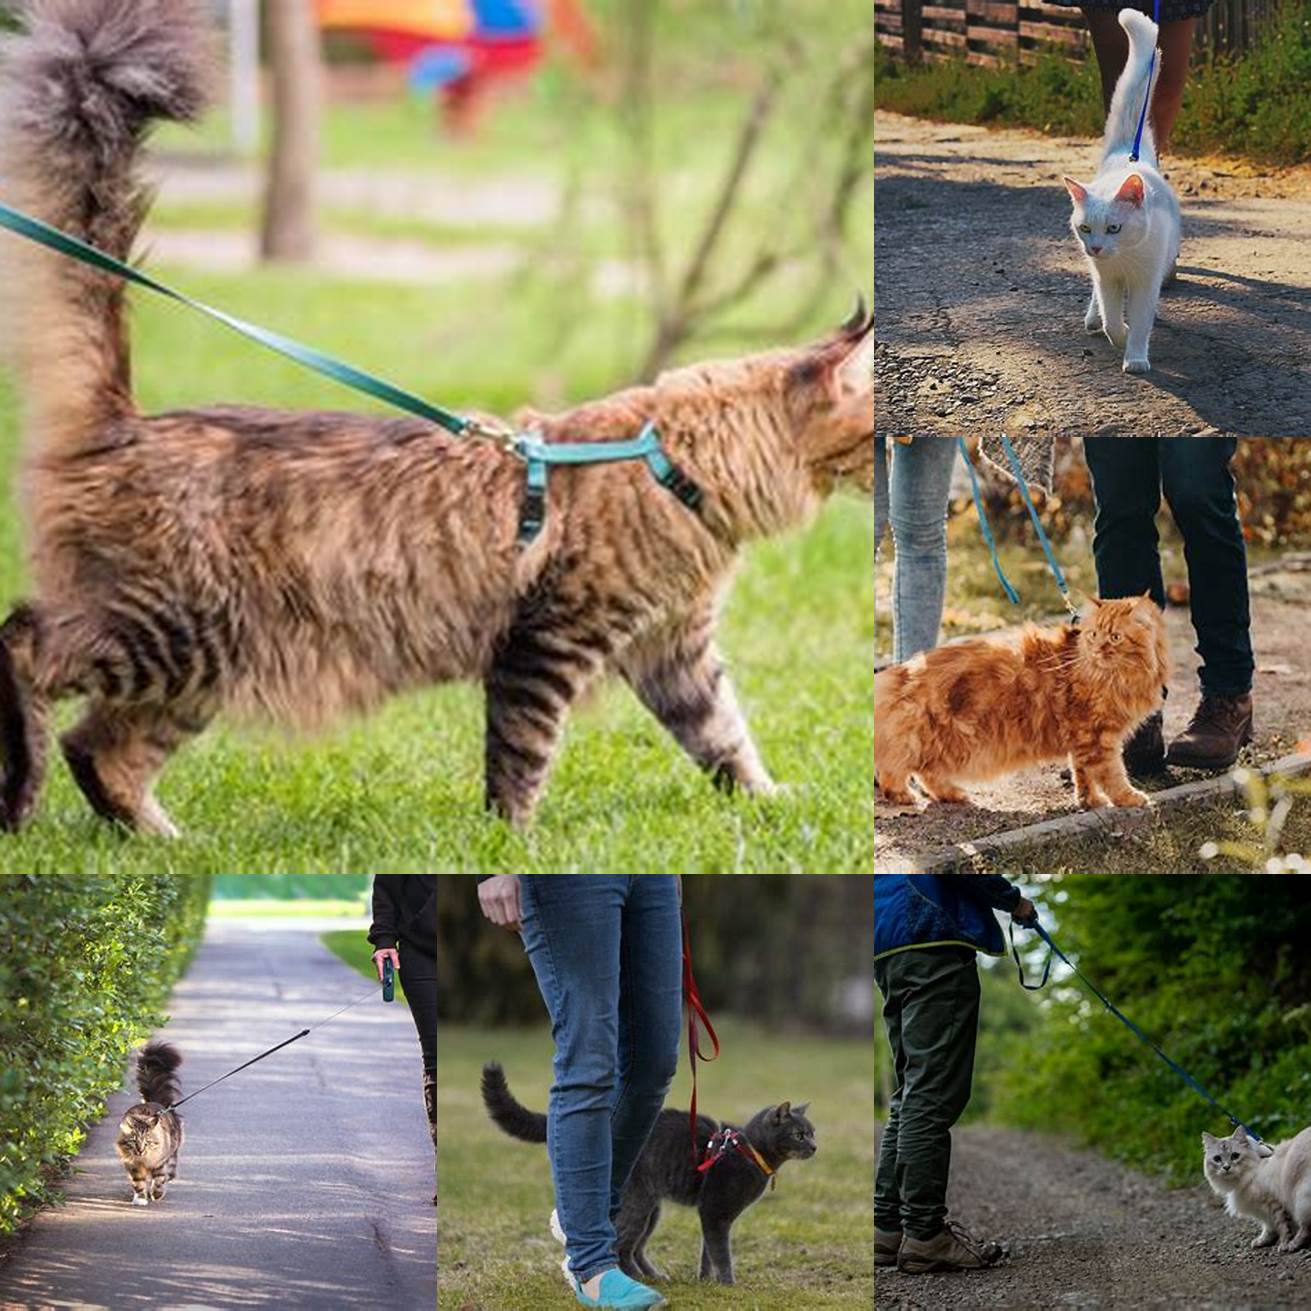 1 Exercise Walking your cat can provide them with the necessary exercise they need to stay healthy and active